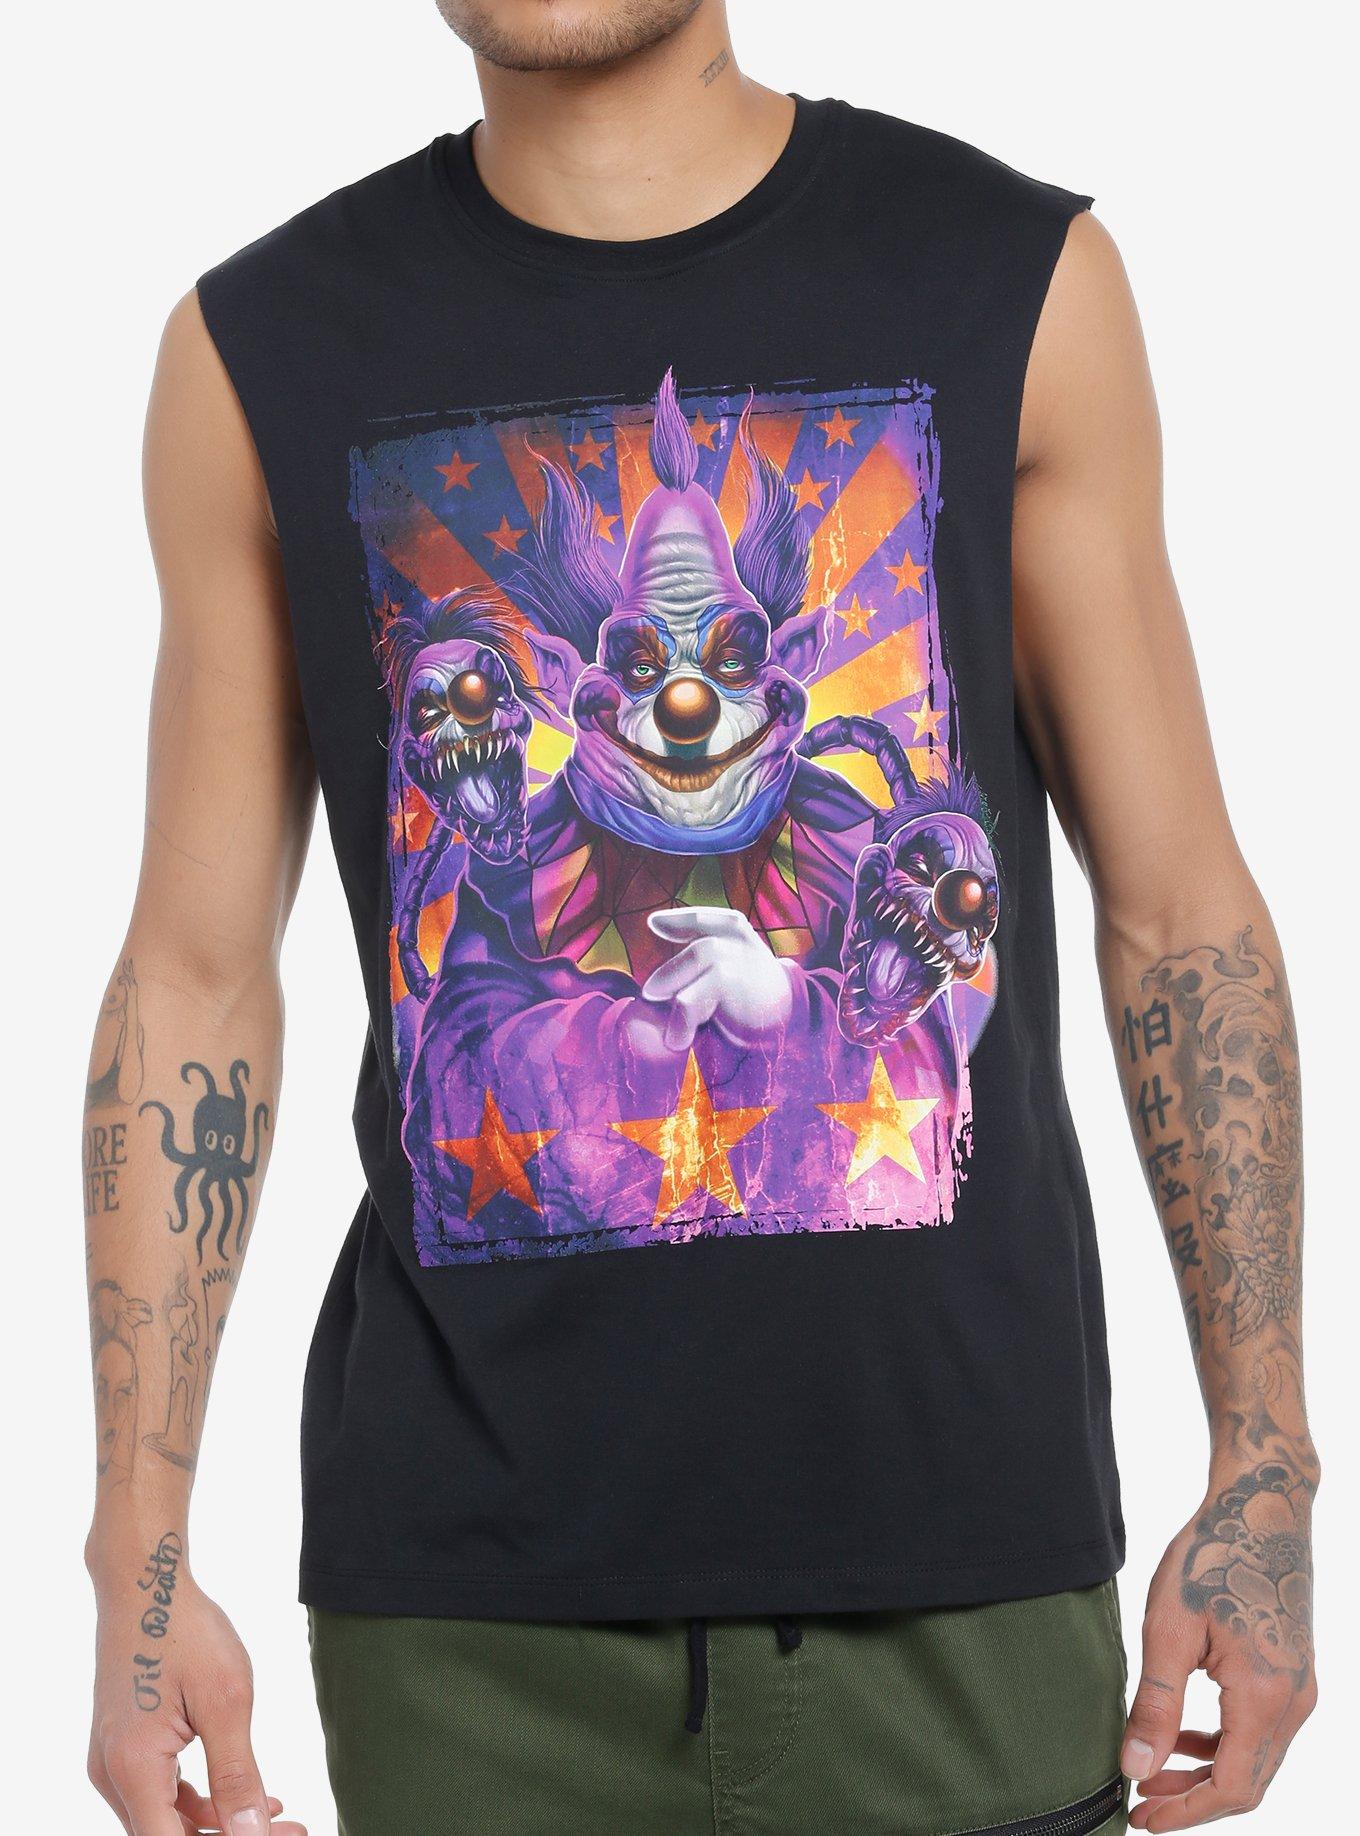 Killer Klowns From Outer Space Jumbo Muscle Tank Top